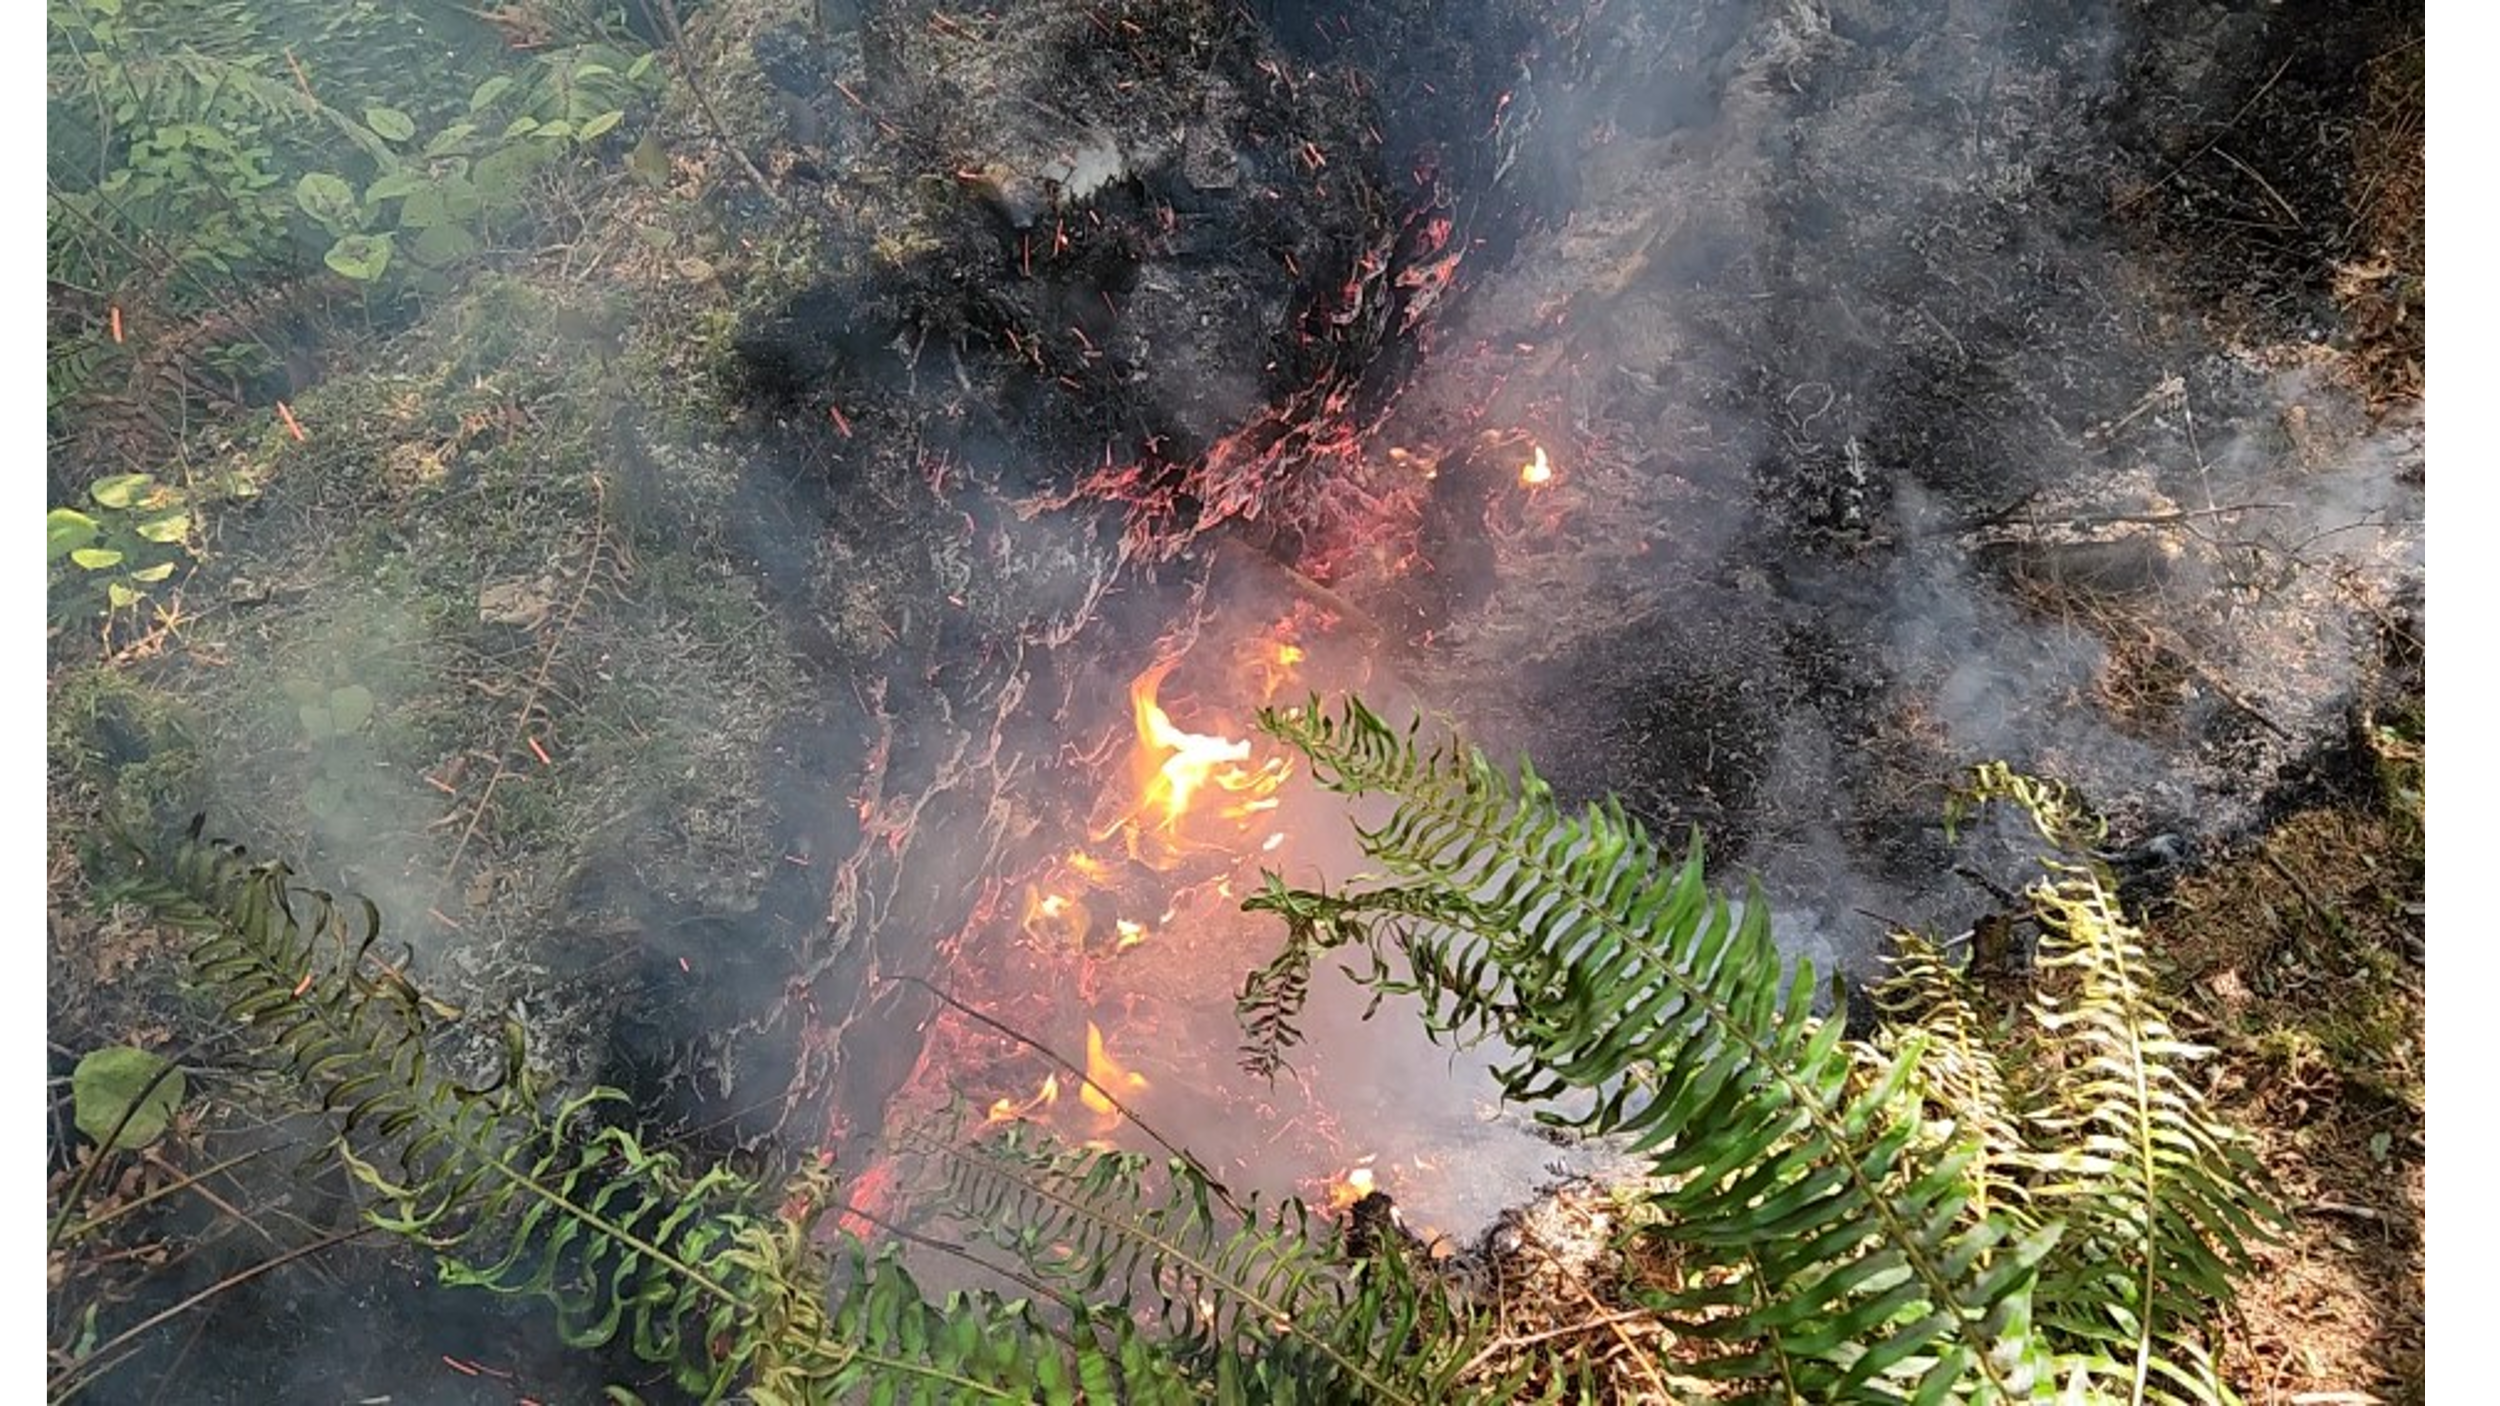 A small flame is visible from creeping fire on the forest floor.